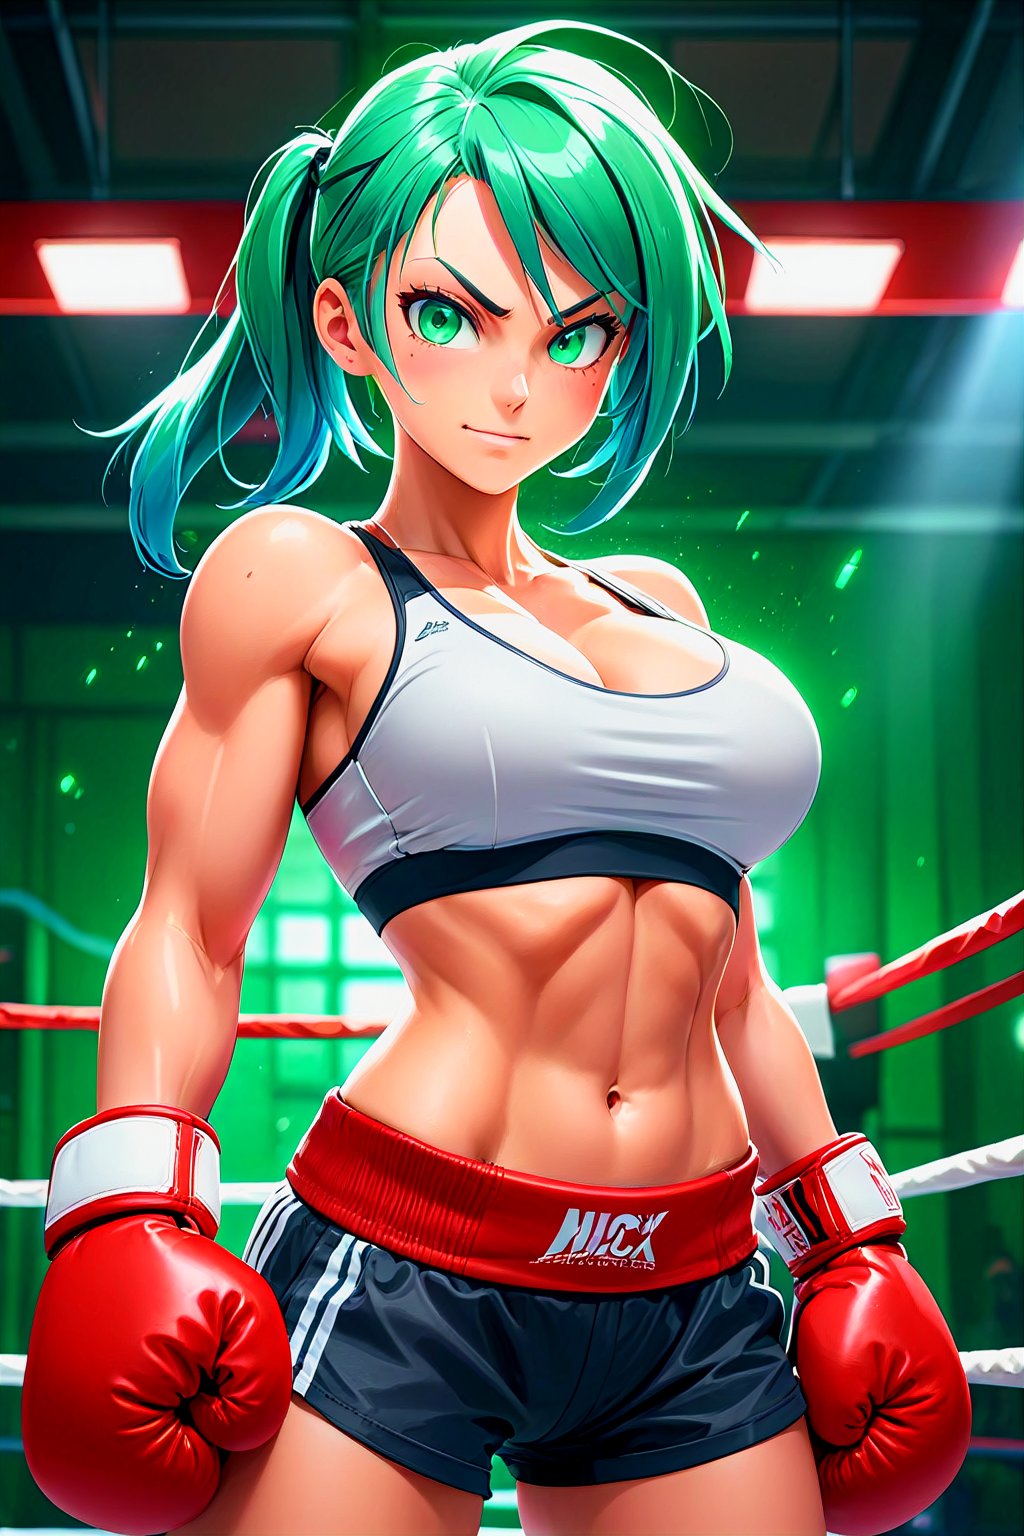 blue hair, green eyes, red boxing gloves, attack pose, smug, smirk, abs, sports bra, large breasts, from below, sweat, boxing ring backround, volumetric lighting, light particles